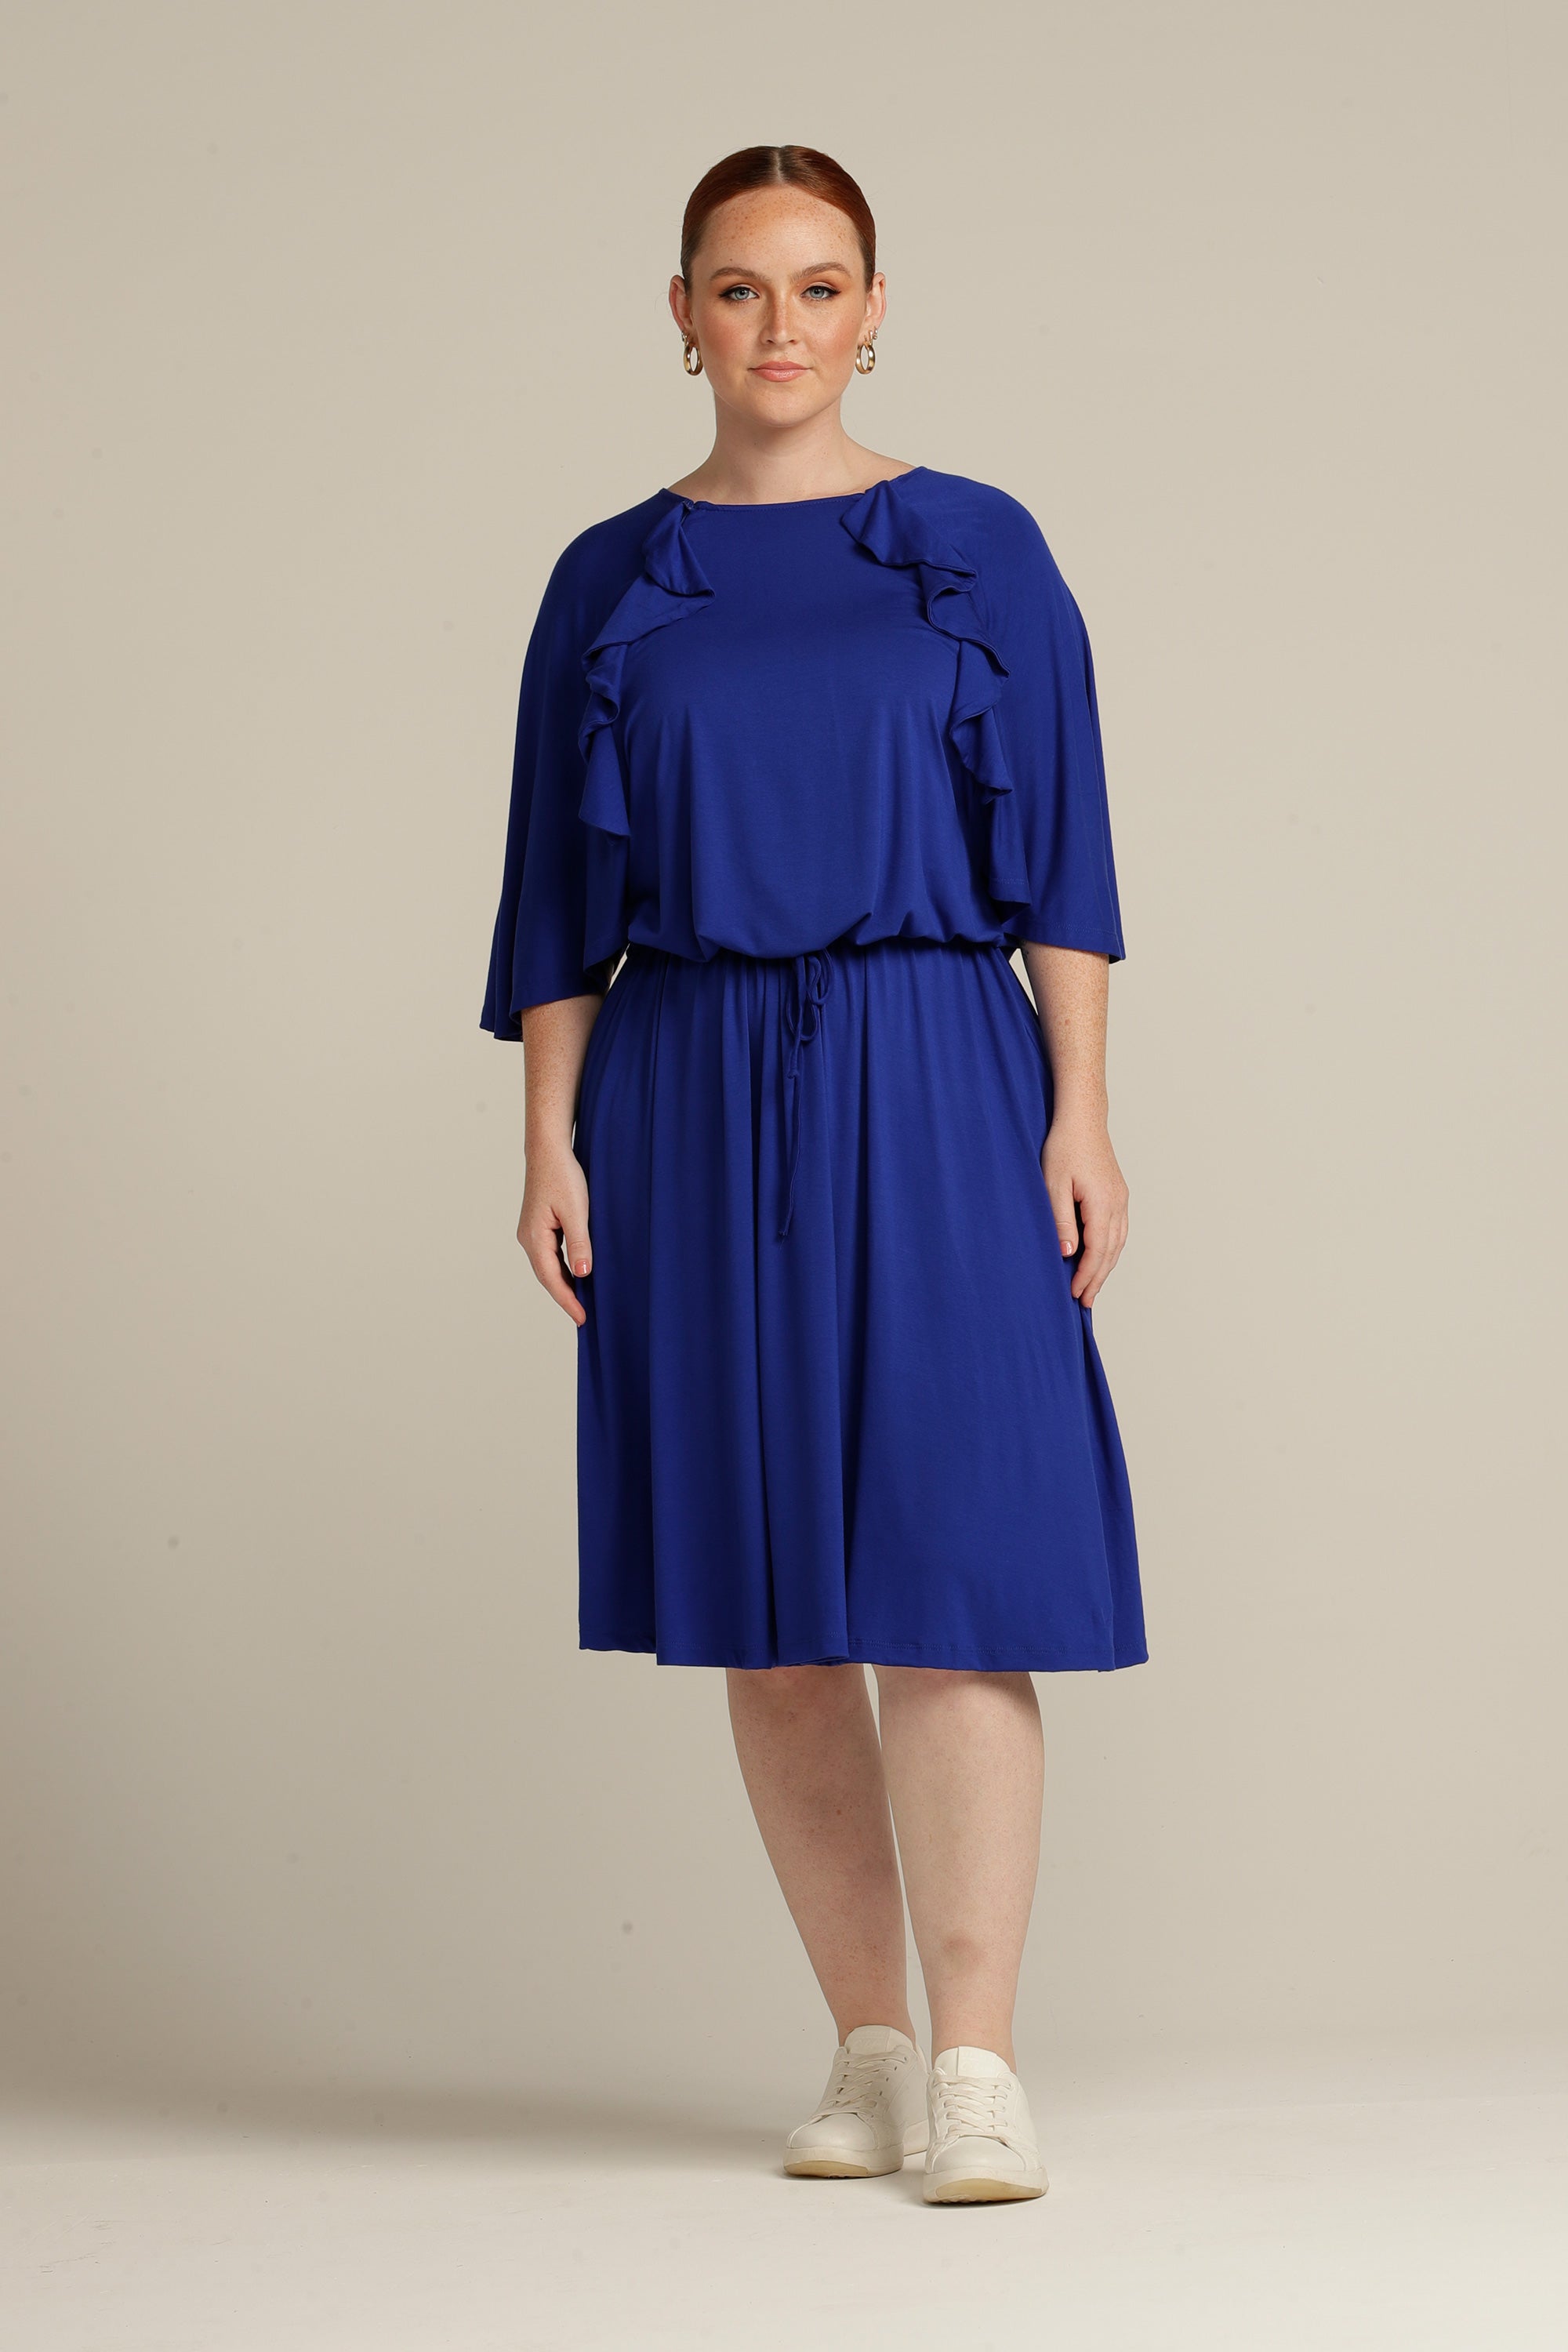 Plus sized woman in royal blue dress with port access